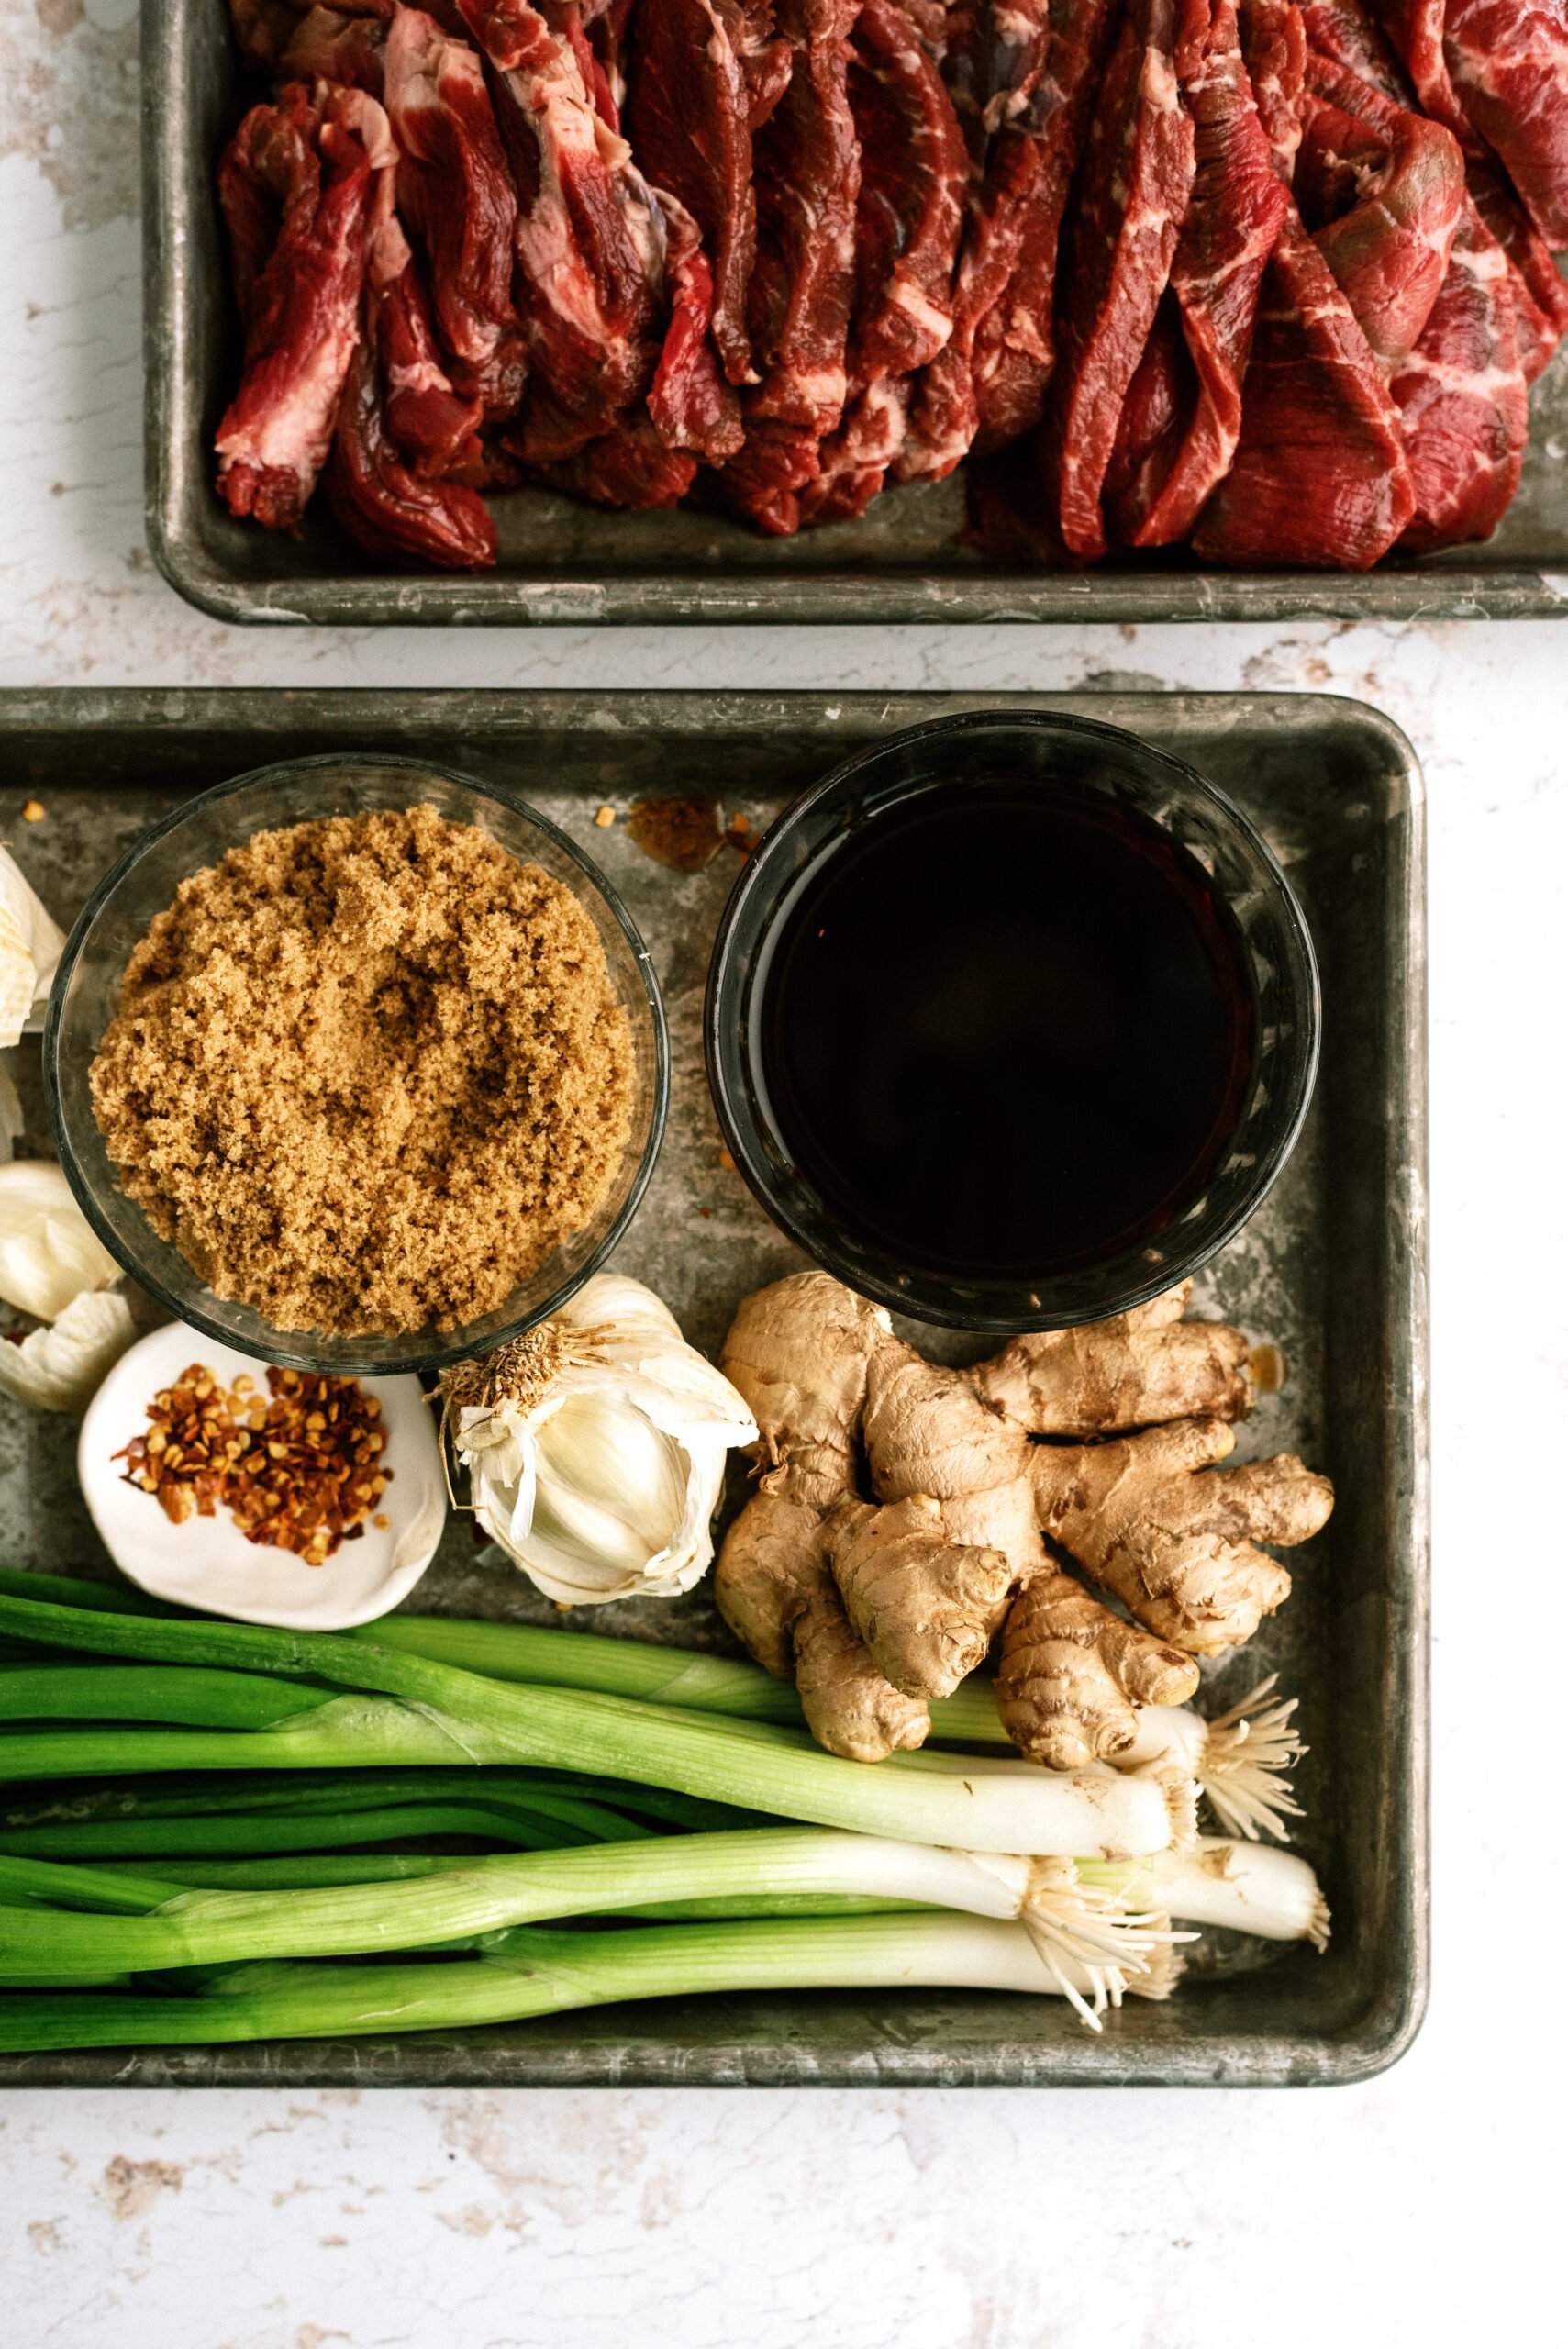 Flank steak and ingredients for Mongolian Beef
